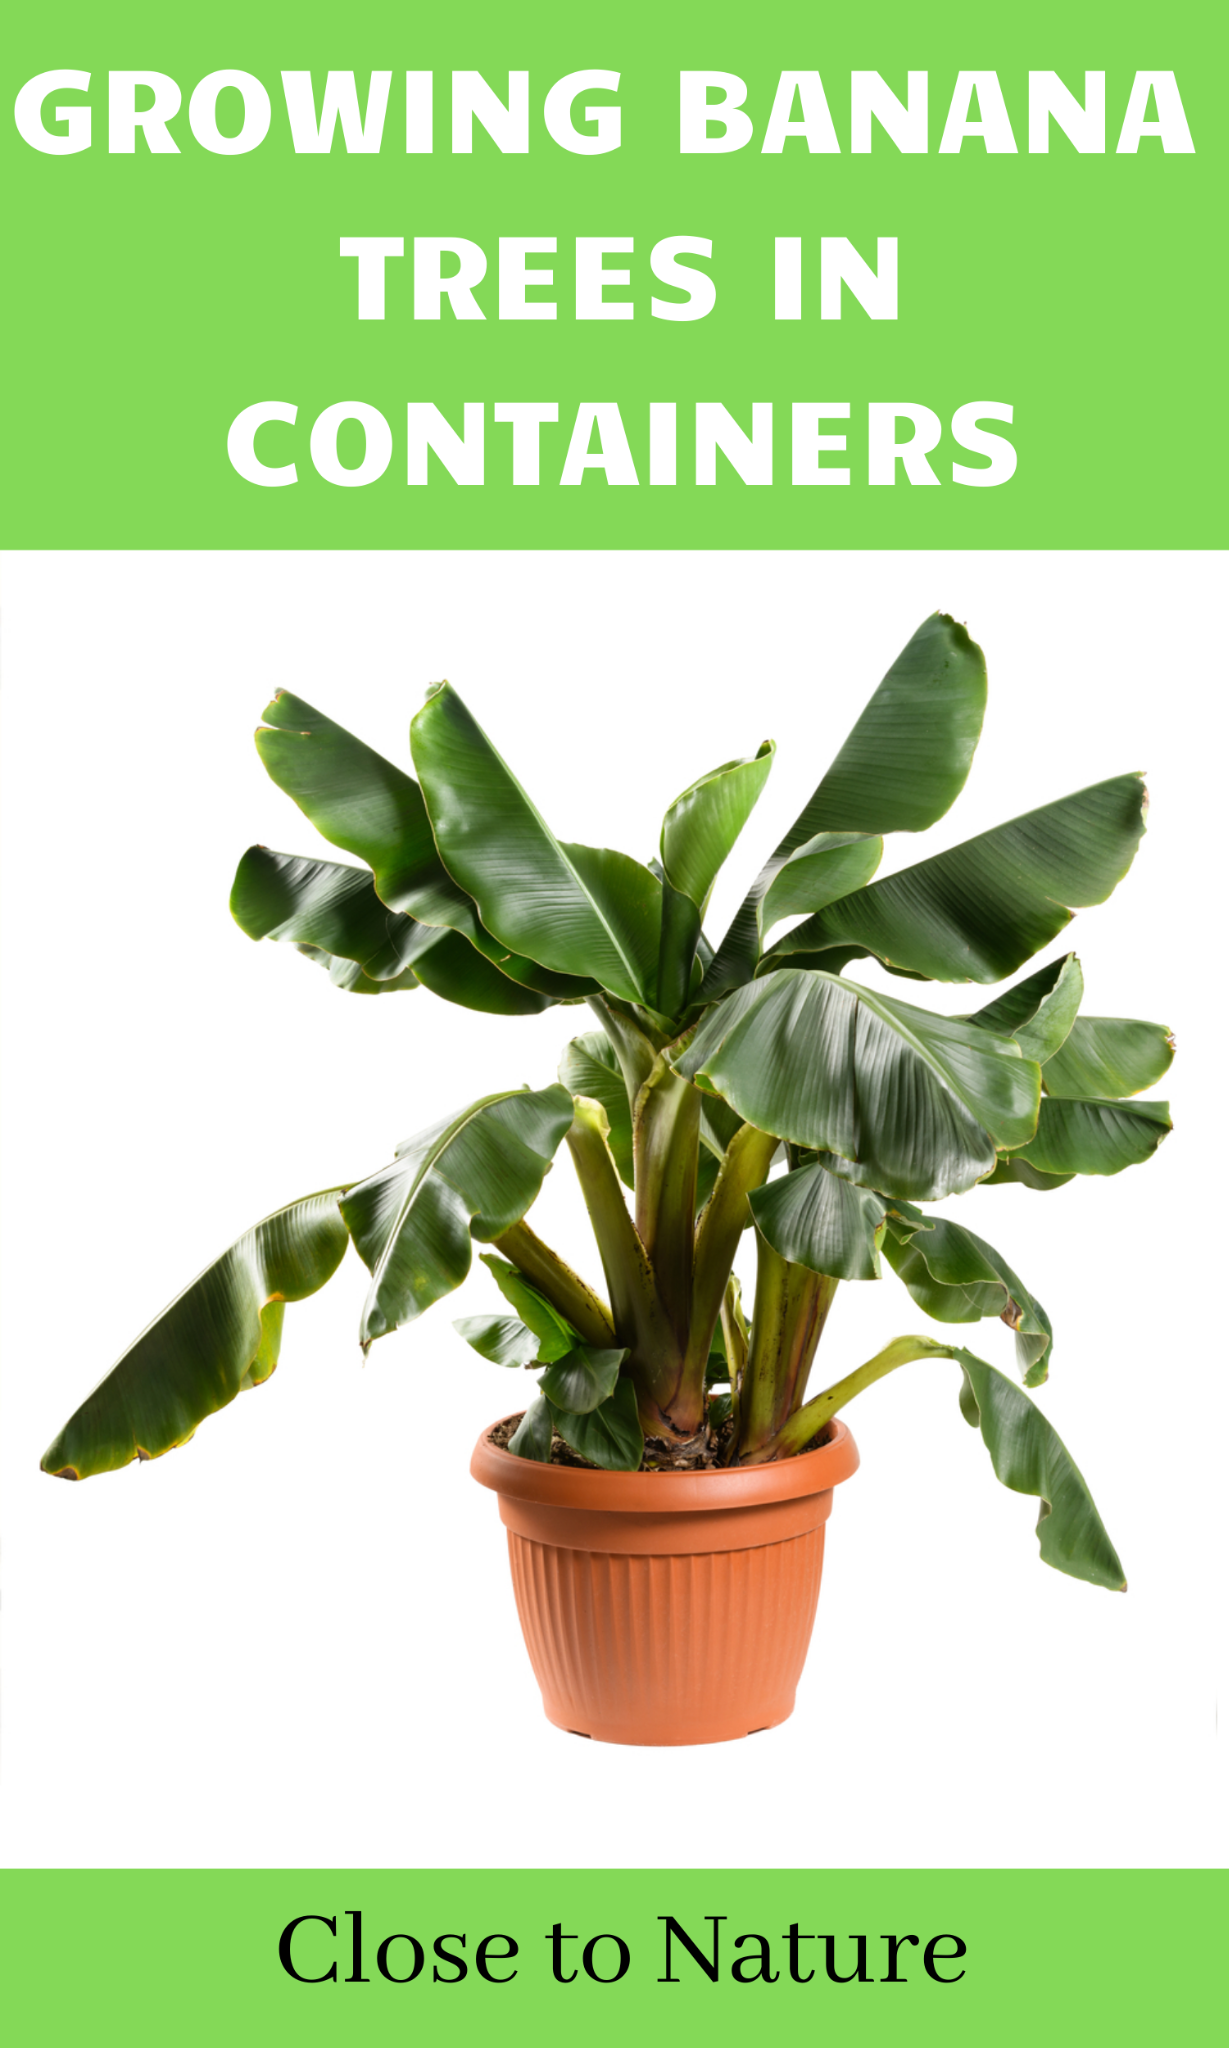 Follow 10 Steps To Growing Banana Trees In Containers